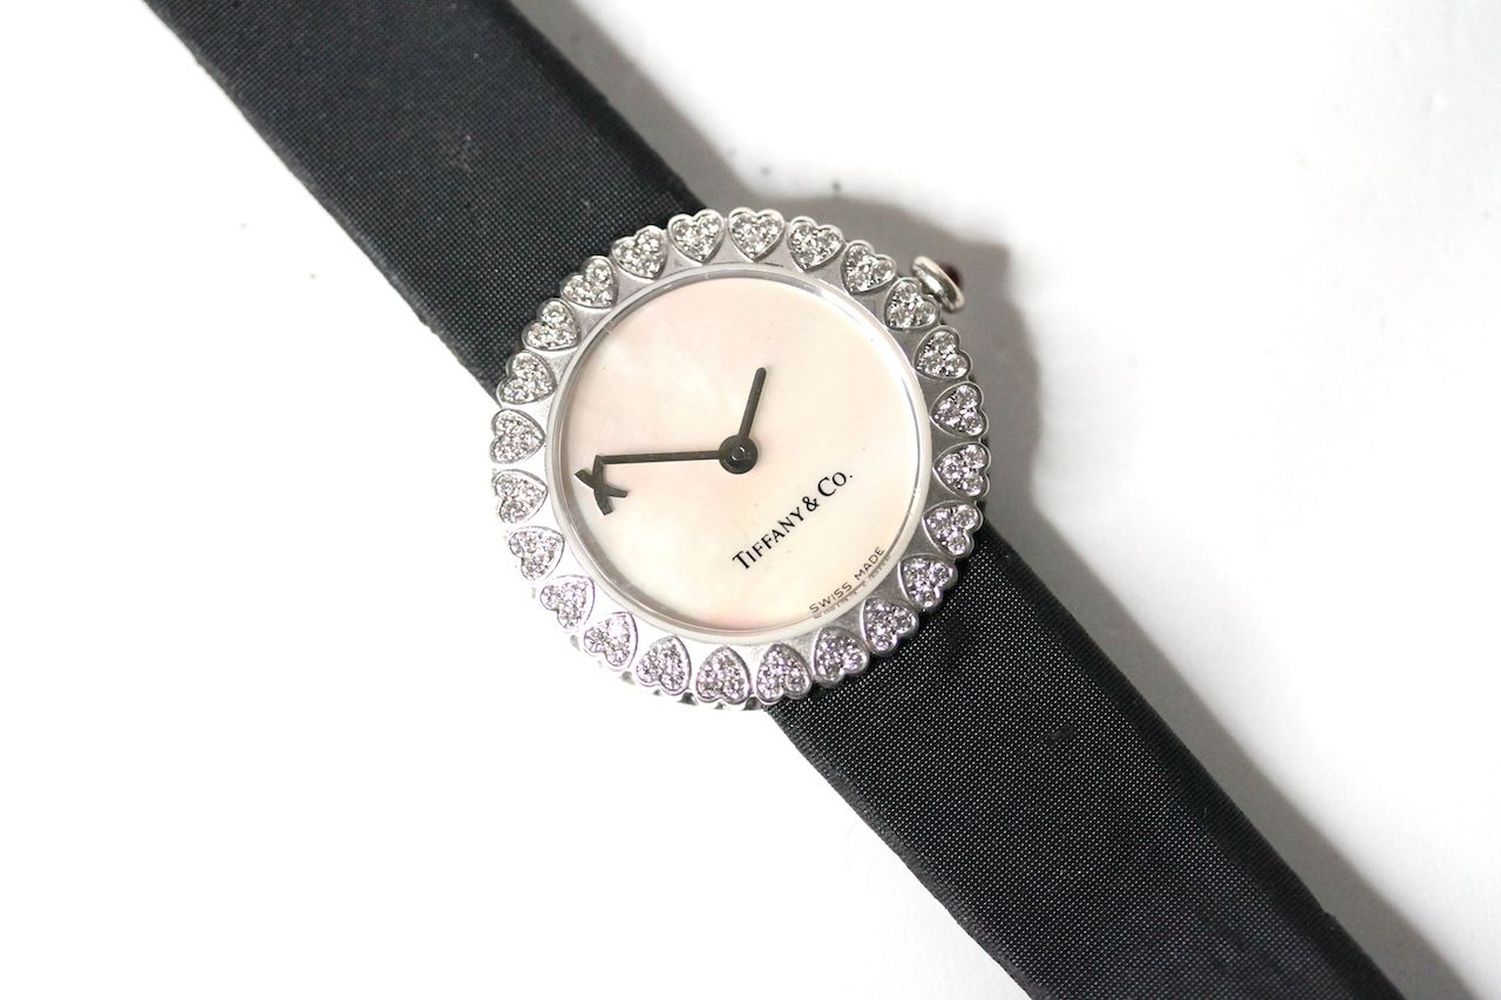 LADIES 18CT TIFFANY & CO KISS PICASSO QUARTZ WATCH, circular mother of pearl dial, diamond heart